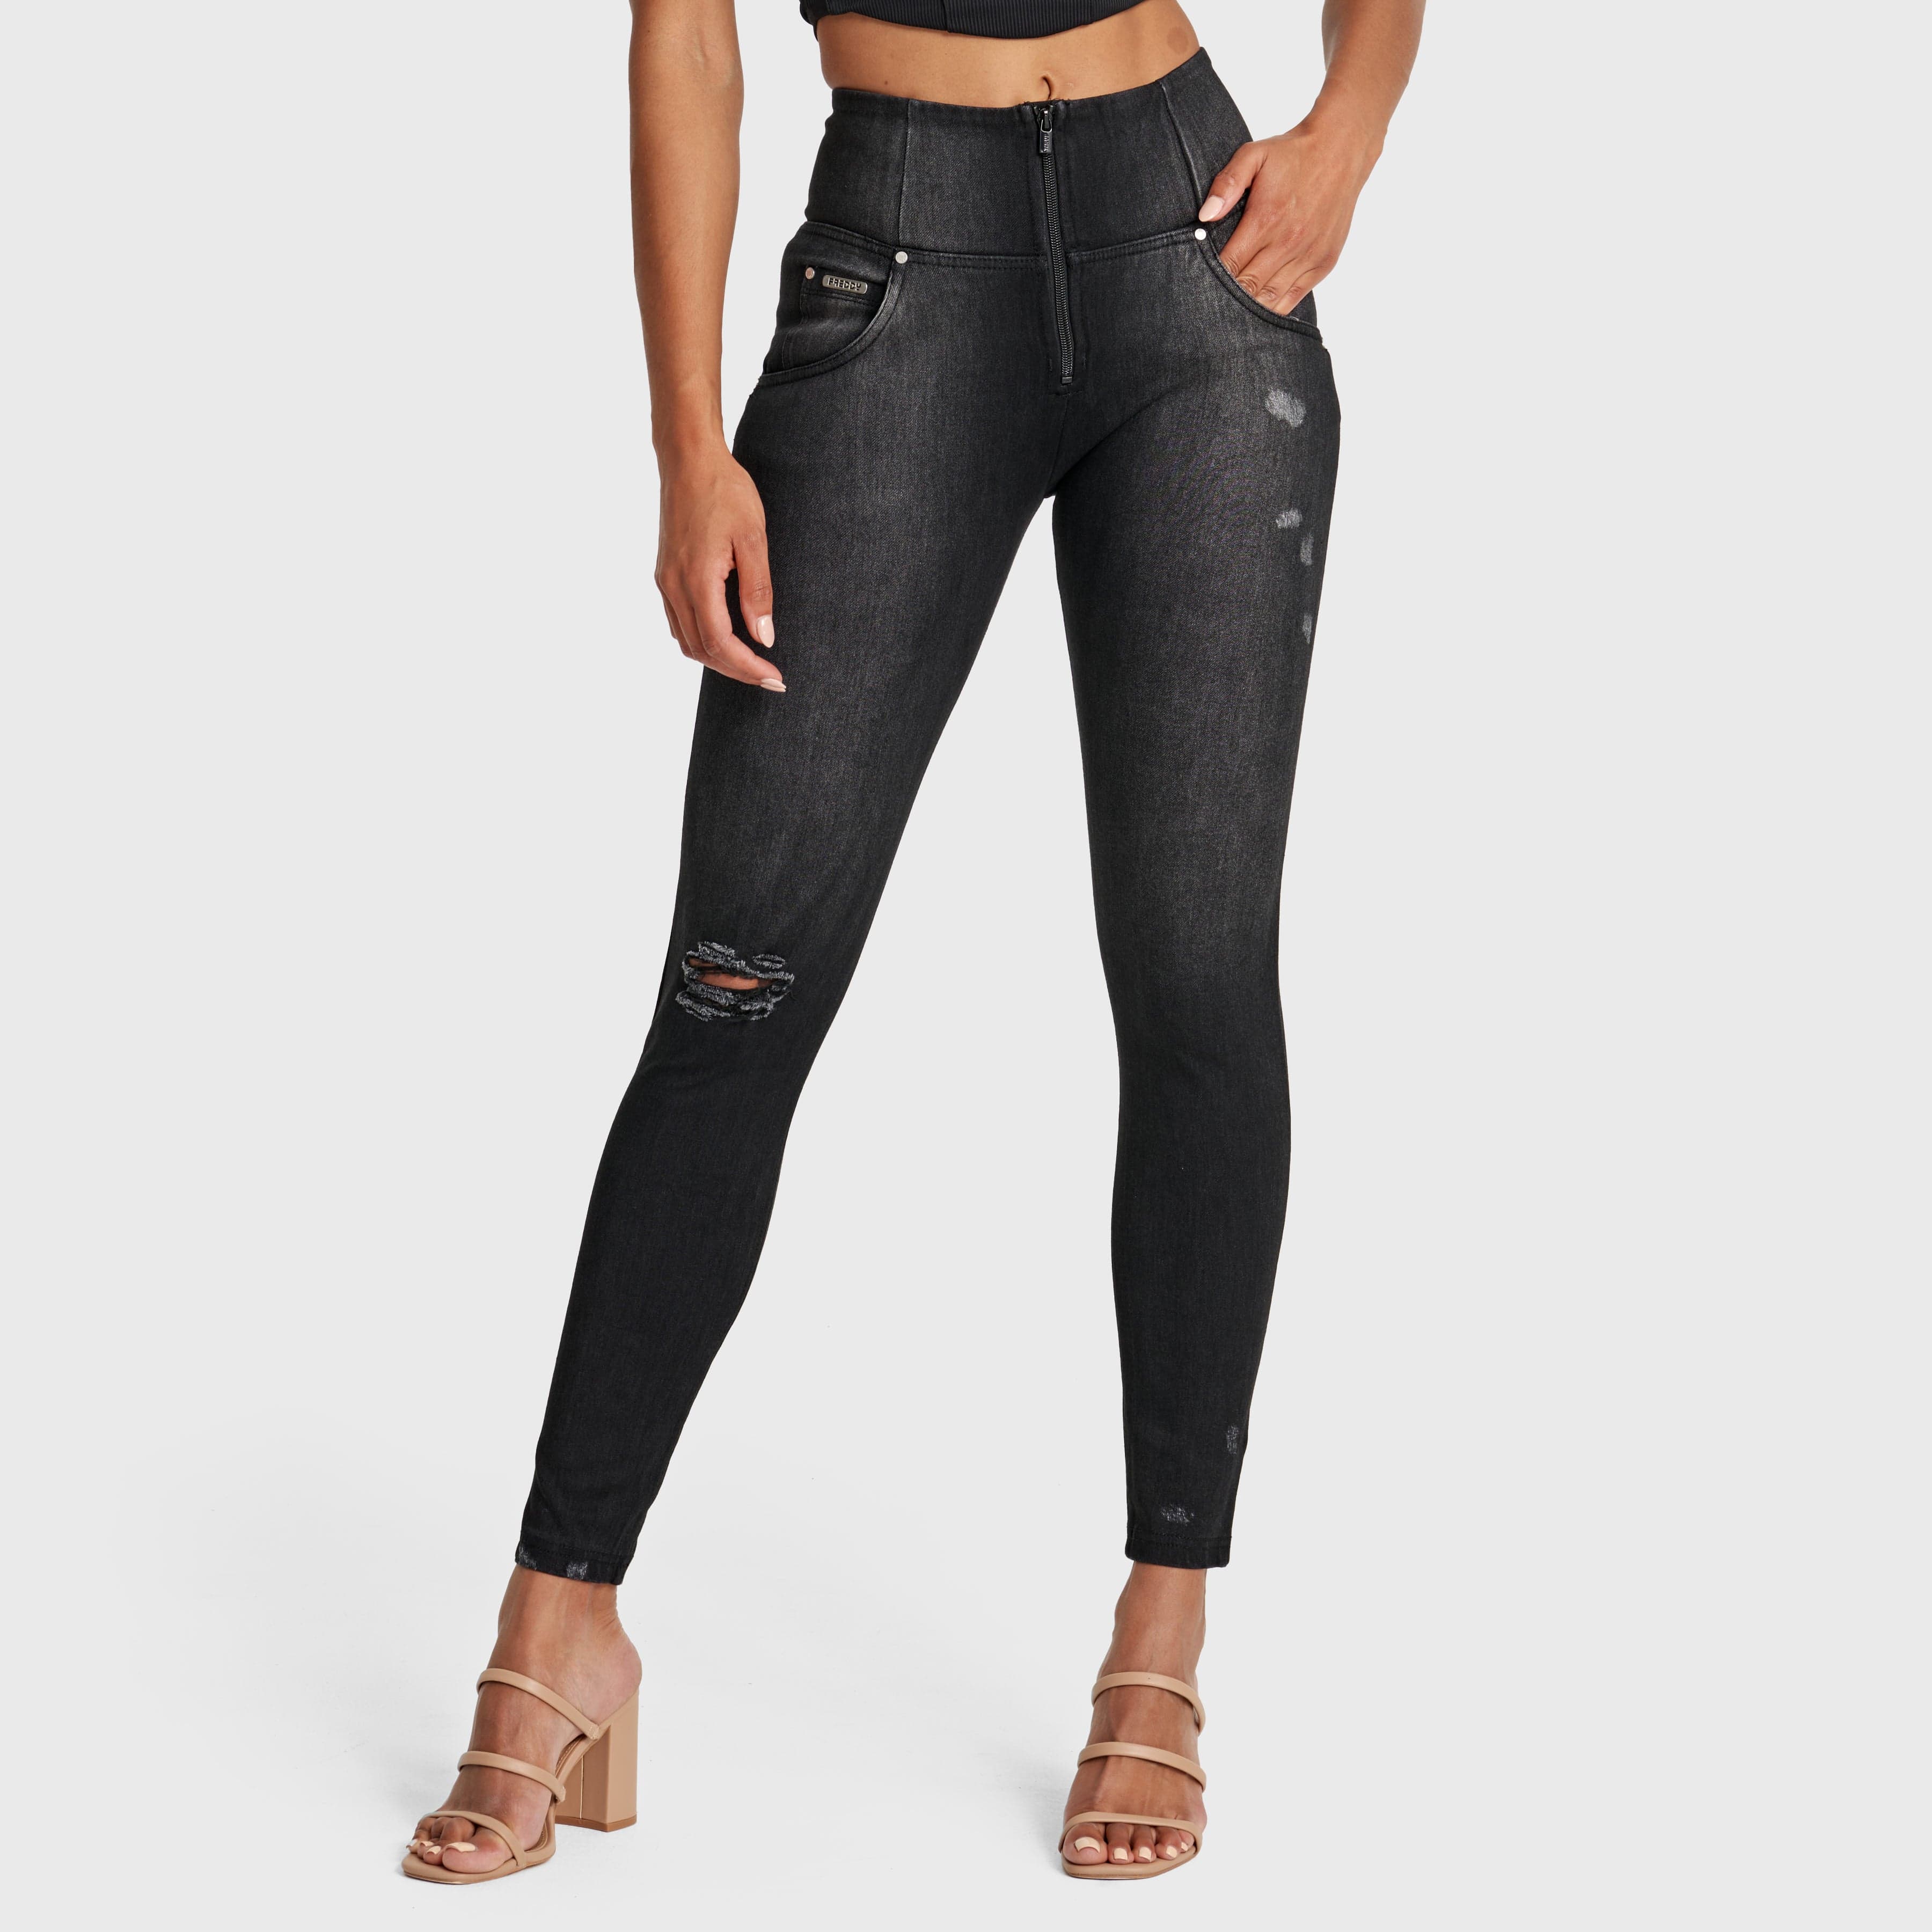 WR.UP® Snug Distressed Jeans - High Waisted - Full Length - Black + Black Stitching 1